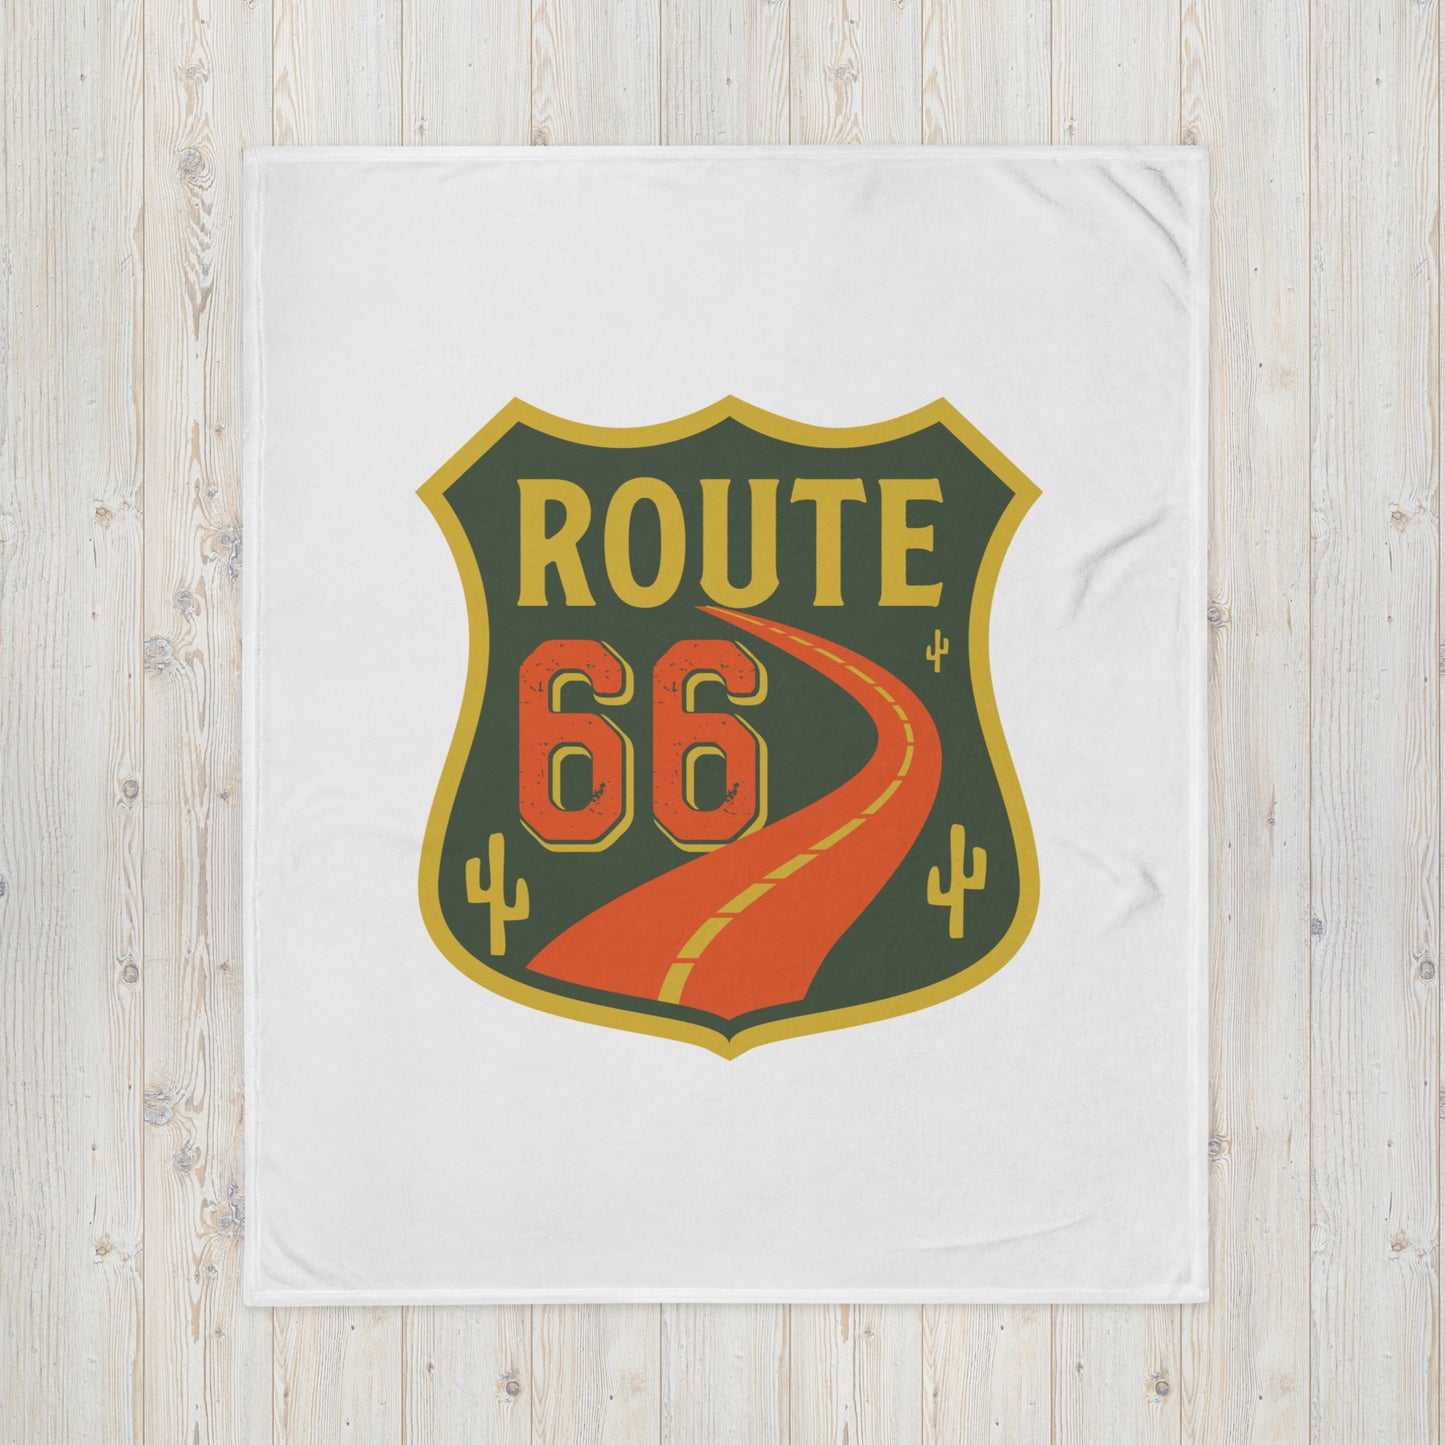 "Route 66" Blanket - Weave Got Gifts - Unique Gifts You Won’t Find Anywhere Else!